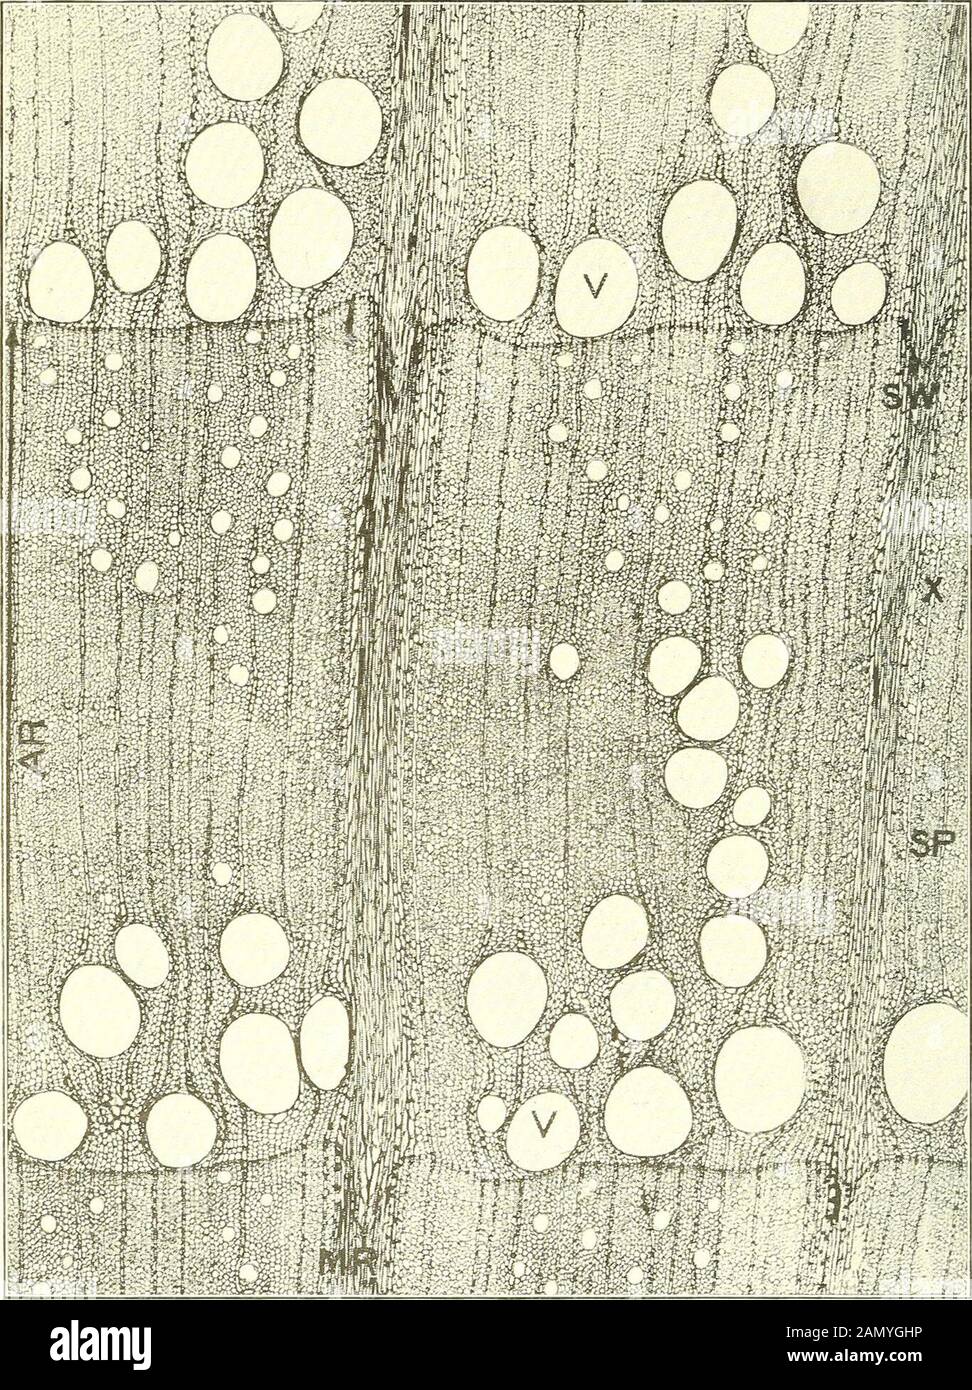 Bulletin of the U.SDepartment of Agriculture . Maple (Cross Section, Magnified 50 Diameters). A Diffuse-Porous Wood. AR, annual ring; SP, springwood; SIF, summerwood; MR, medullnry ray; P, pith fleck; V,pores or vessels; A, wood prosenchyma (fibers, etc.). Bui. 606, U. S. Dept. of Agriculture. Plate II.. Red Oak (Cross Section, Magnified 50 Diameters). A Ring-Porous Wood. AR, annual ring; SP, springwood; Sir, summerwood; ME, medullary ray; I, pores or vessels;JT, wood prosenchyma (fibers, etc.). Bui. 606, U. S. Dept of Agriculture. Plate III. Stock Photo